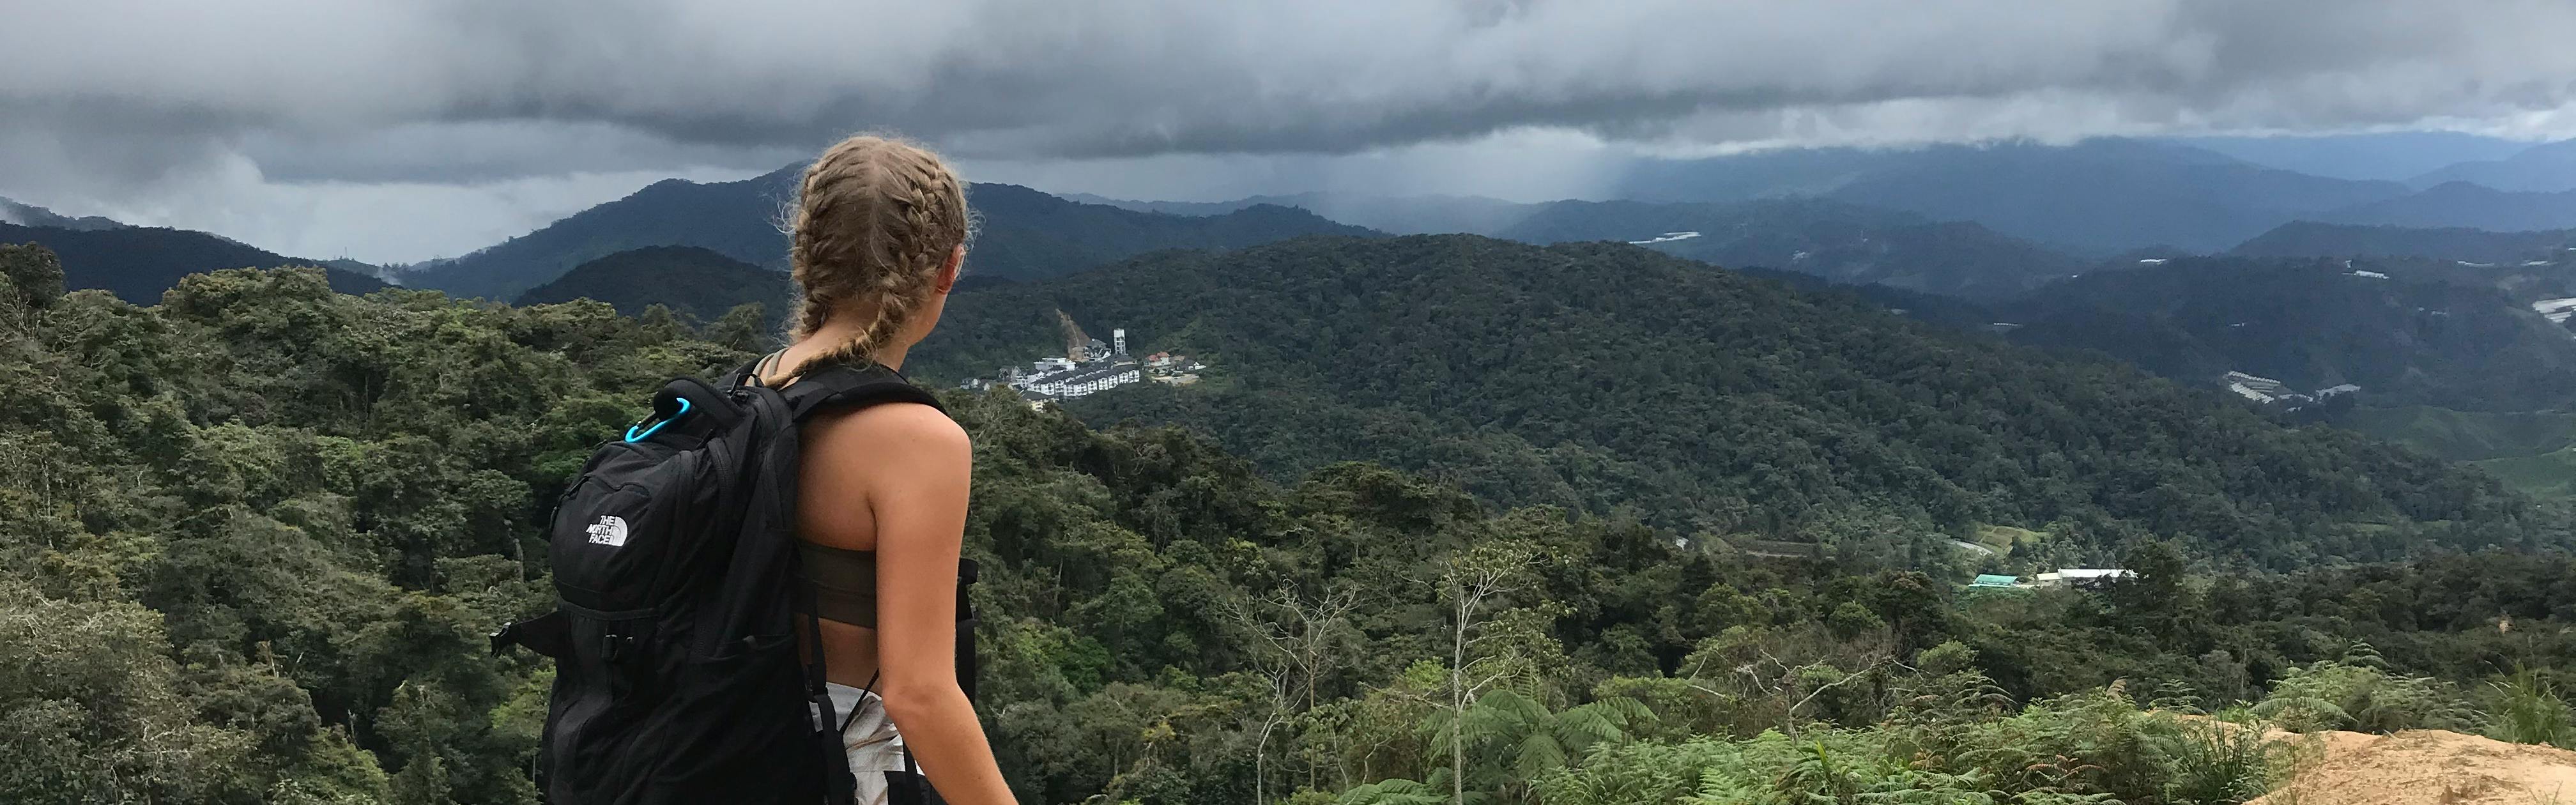 A woman with blonde braids and a backpack looks out at rolling hills and rainforest